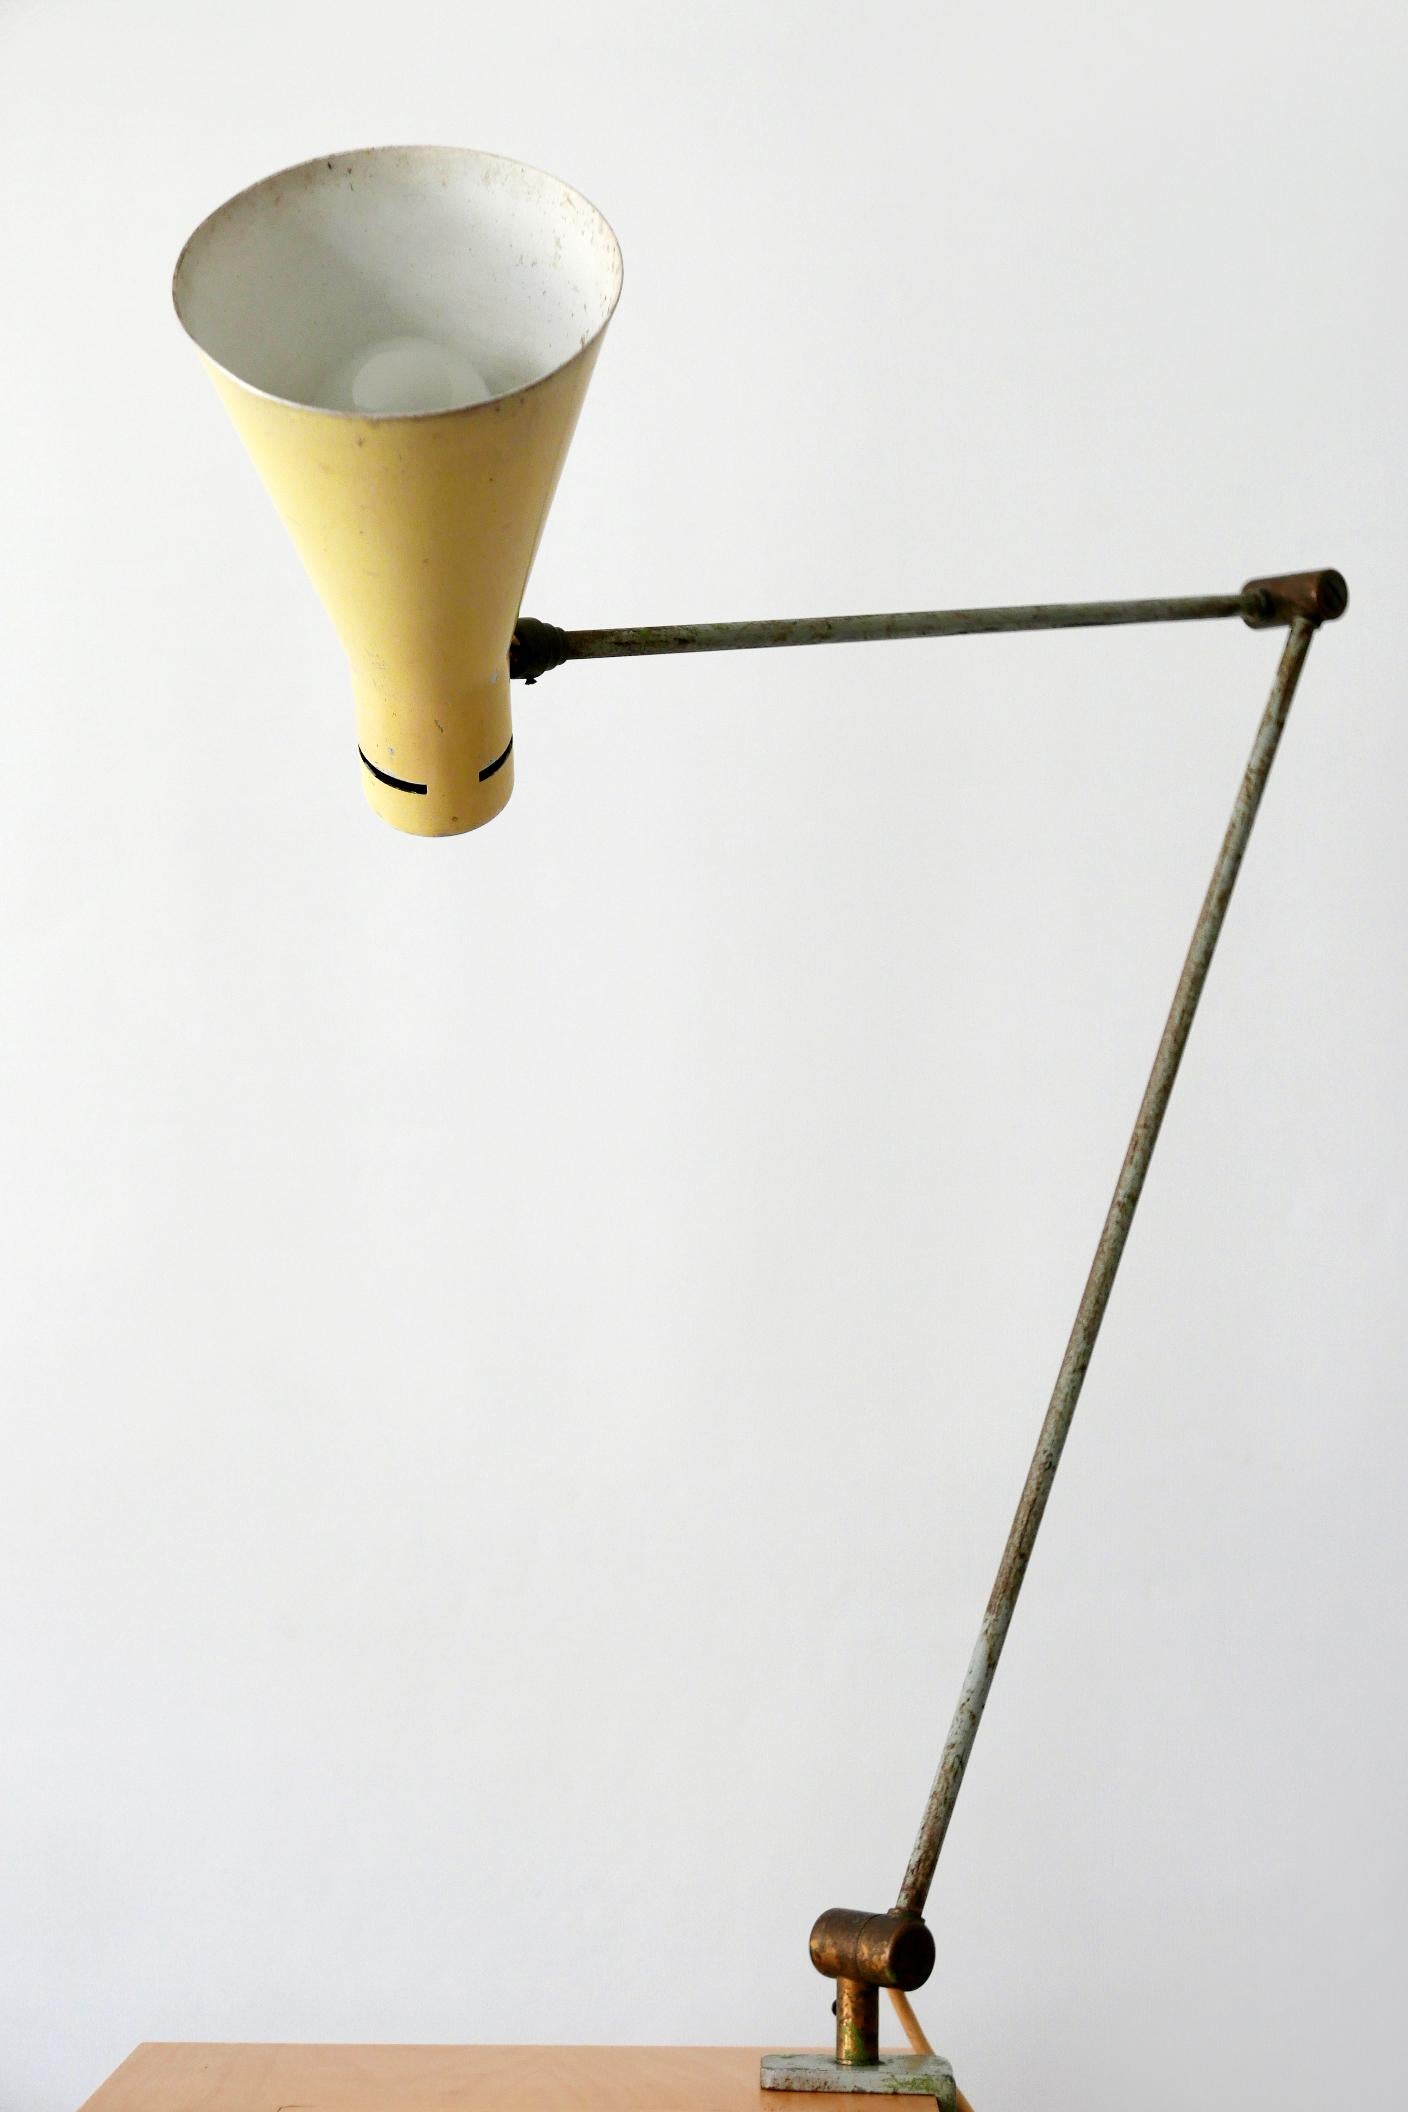 Articulated Clamp Table Light or Task Lamp by Vittoriano Vigano for Arteluce For Sale 3